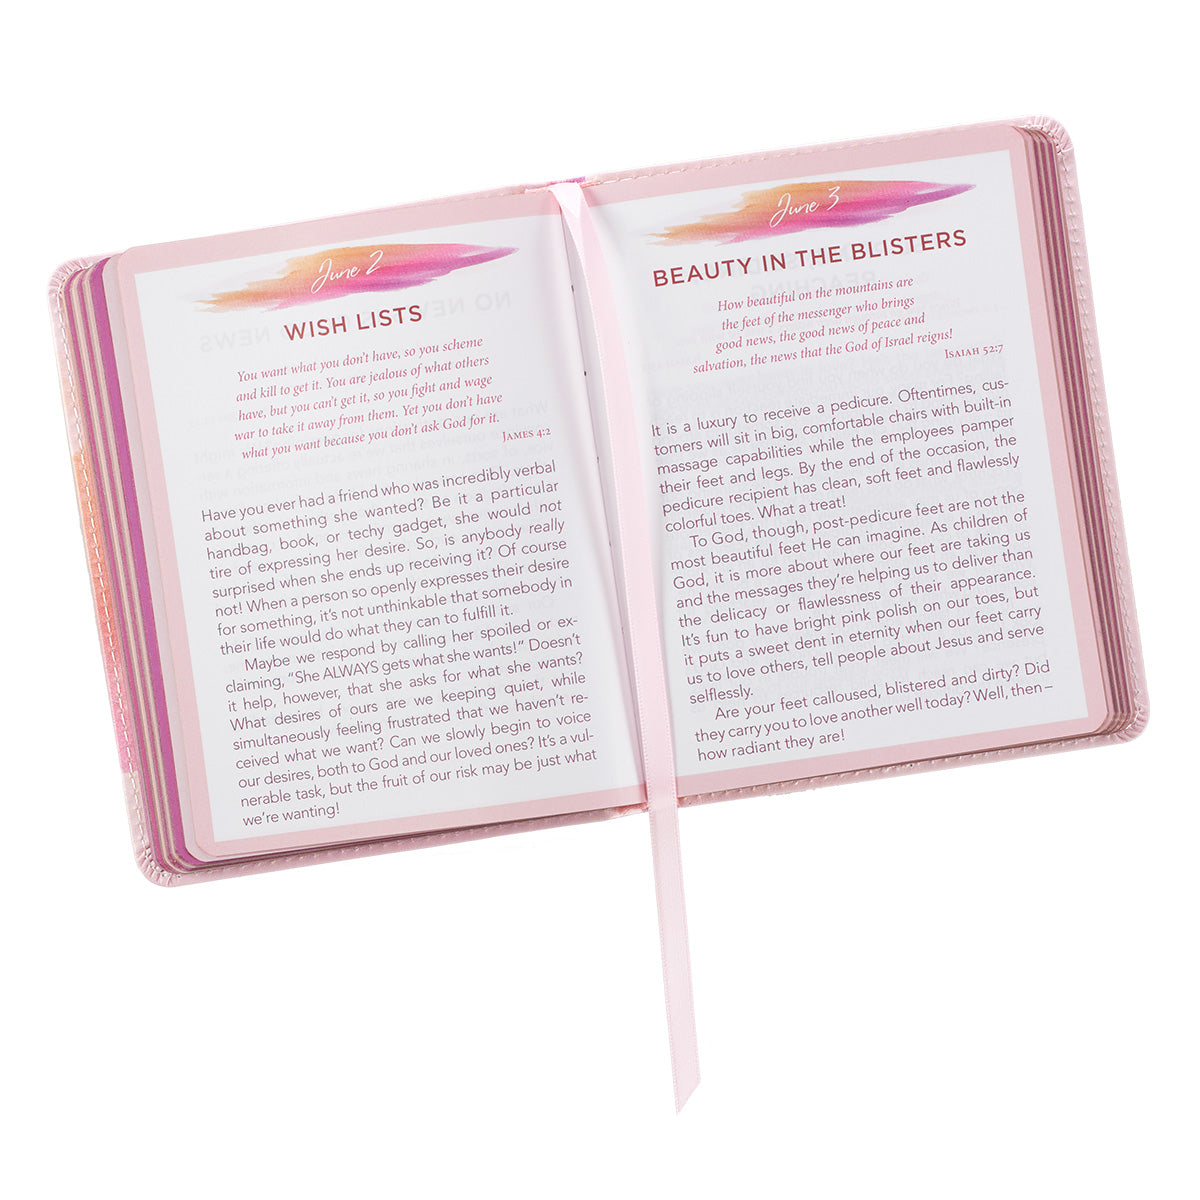 Image of One-Min Devotions for Young Women Lux-Leather other